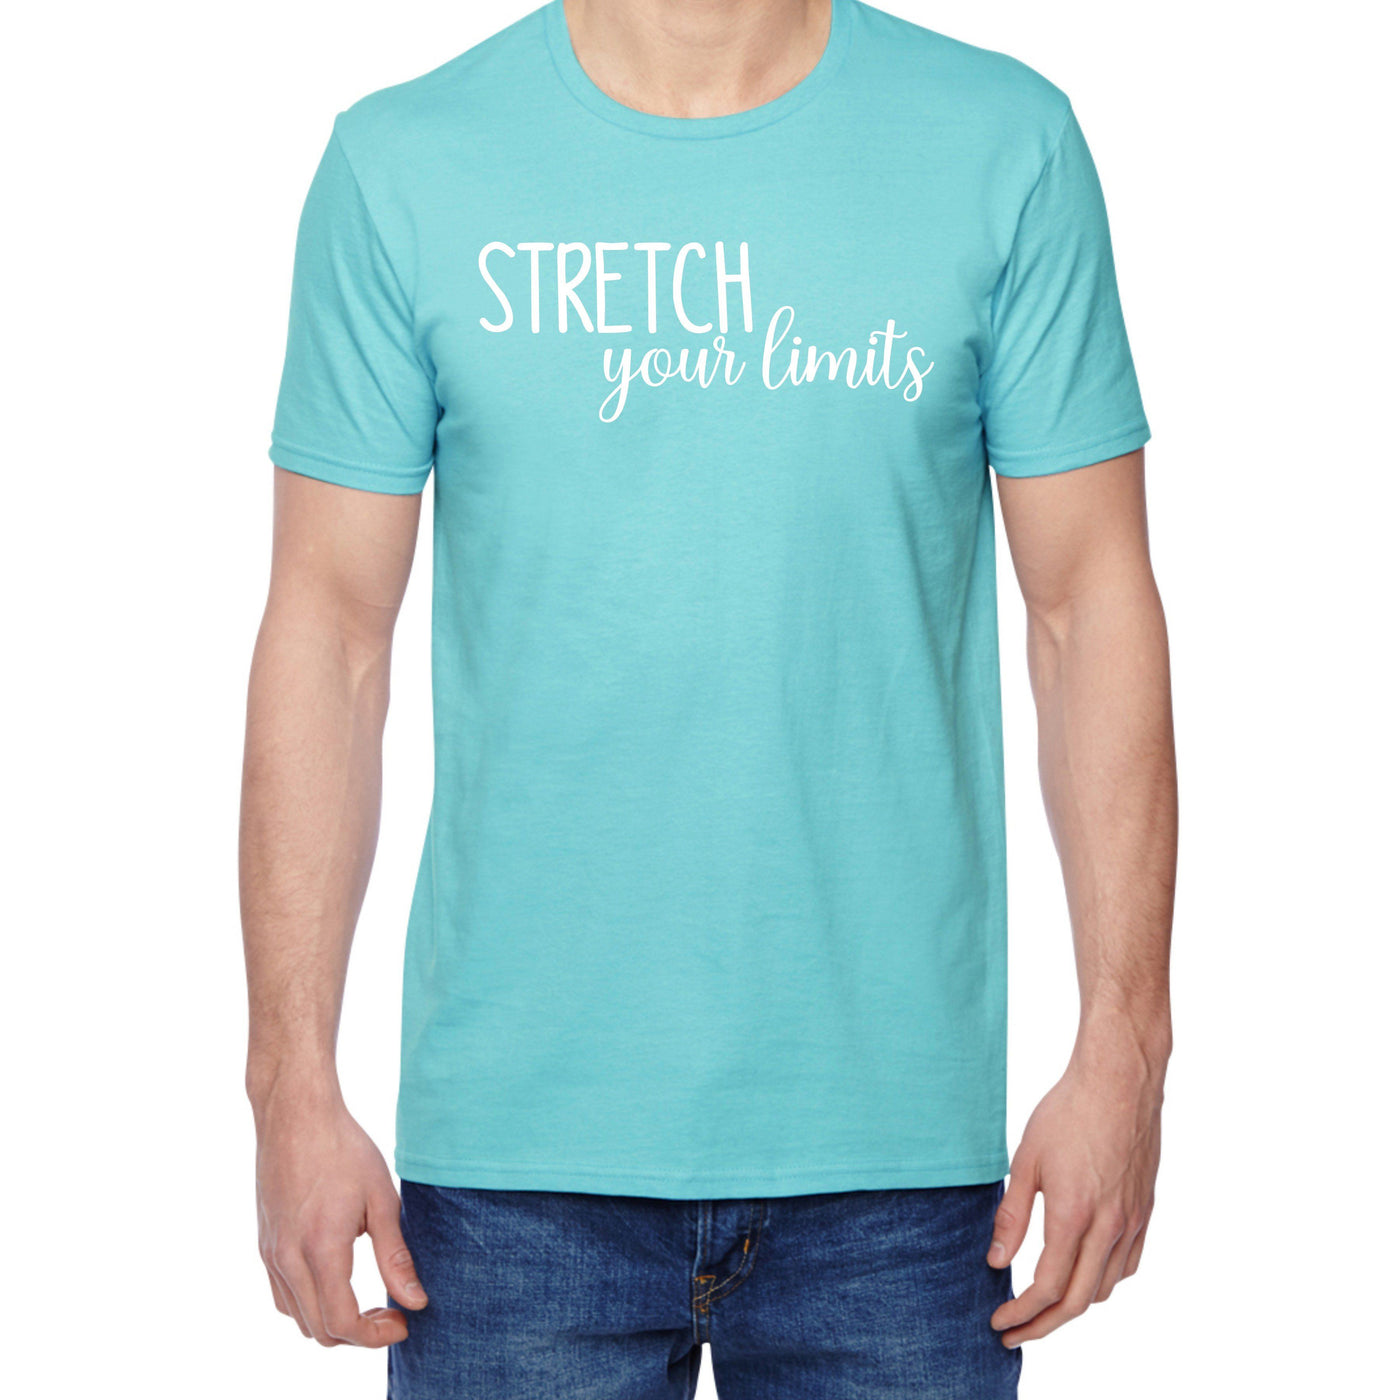 Stretch Your Limits T-shirt